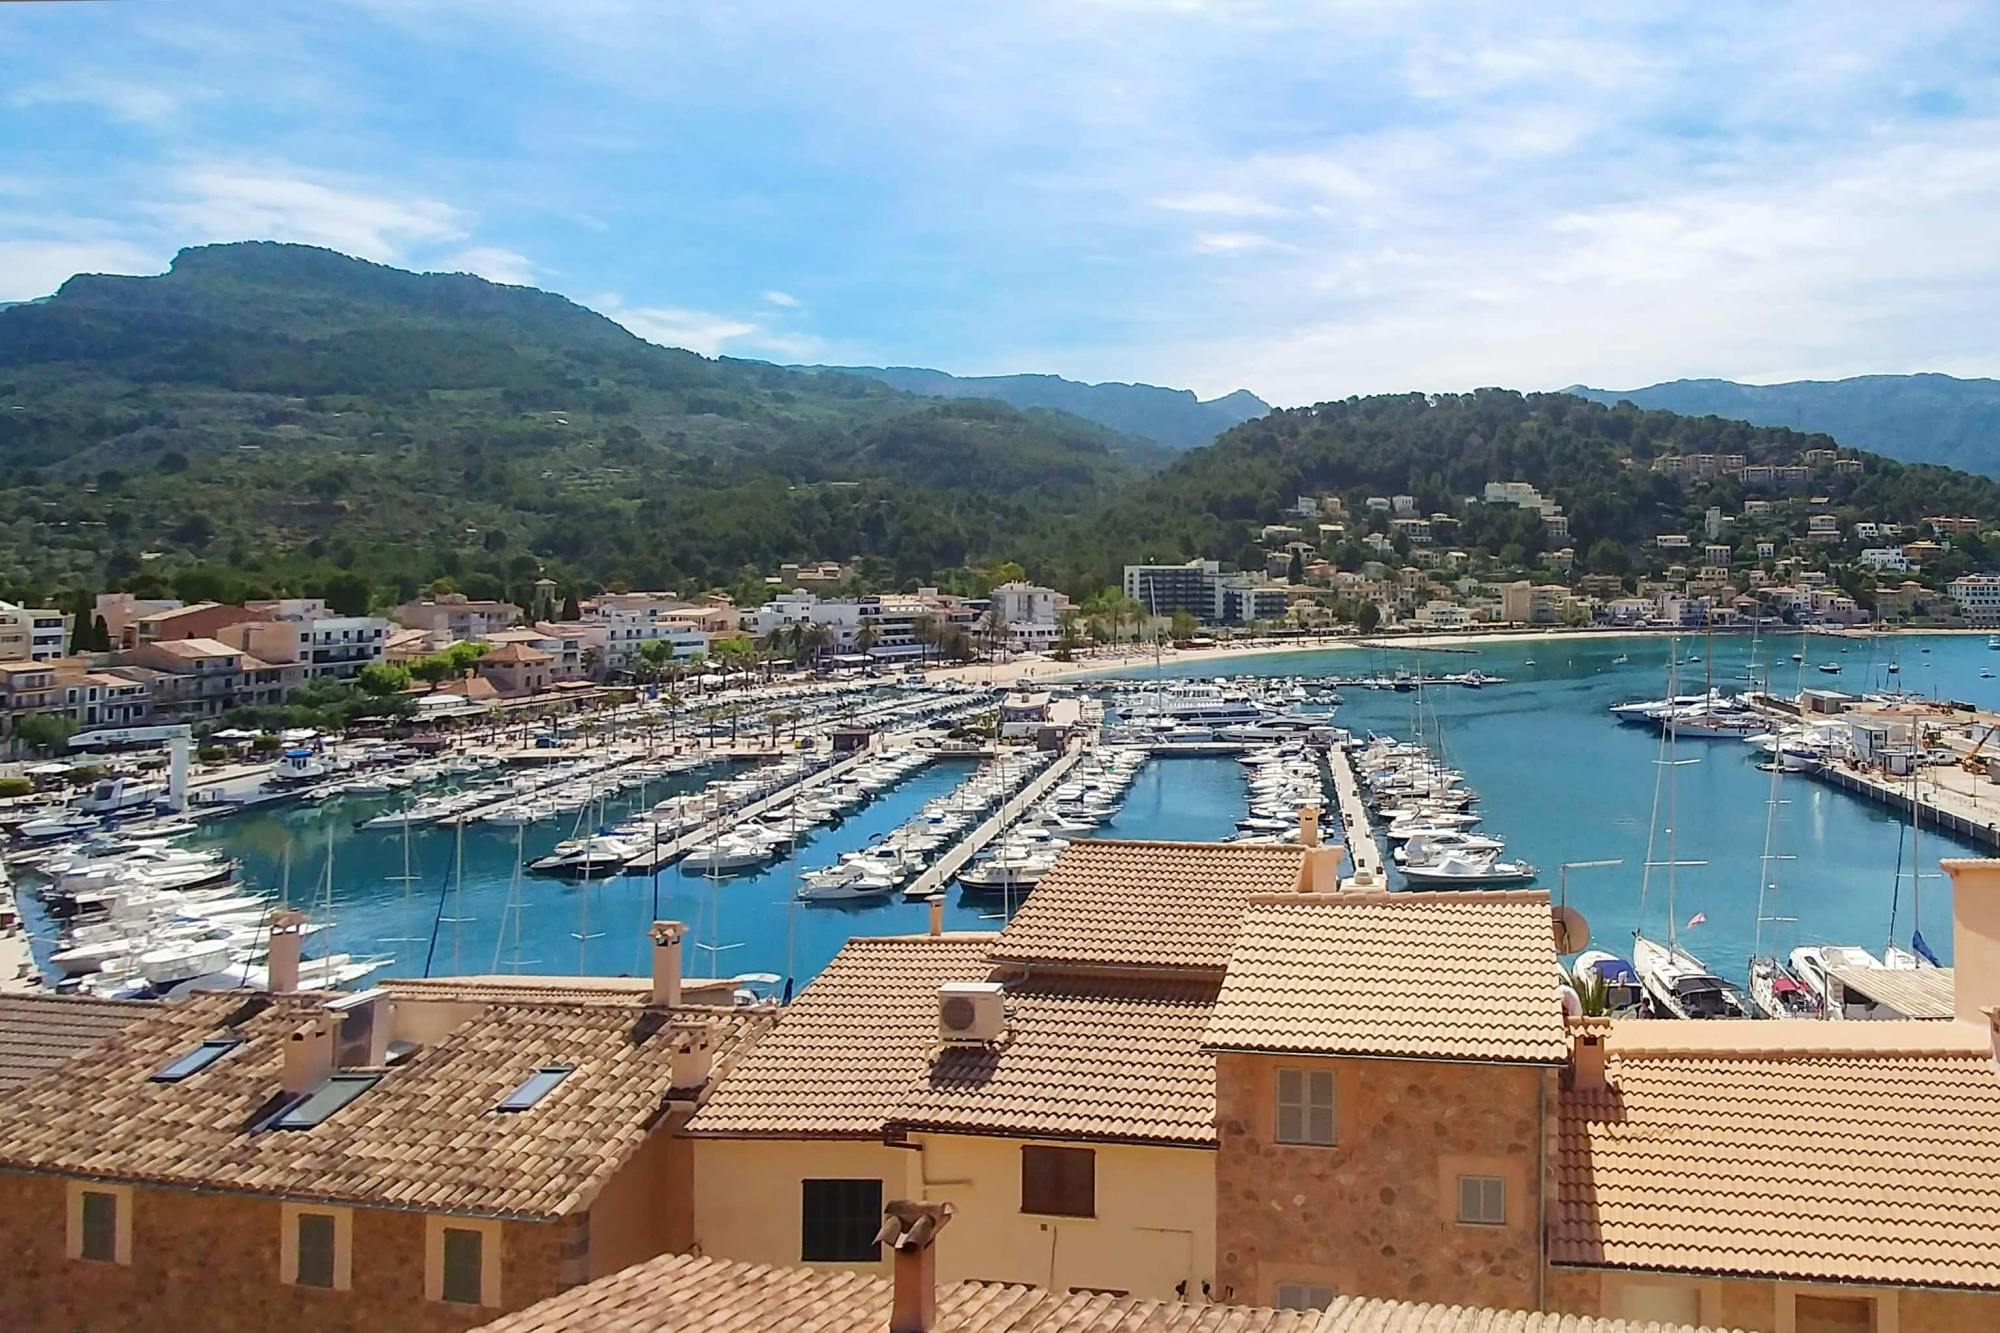 Full day Majorca Tour with Port de Soller and Lluc Monastery